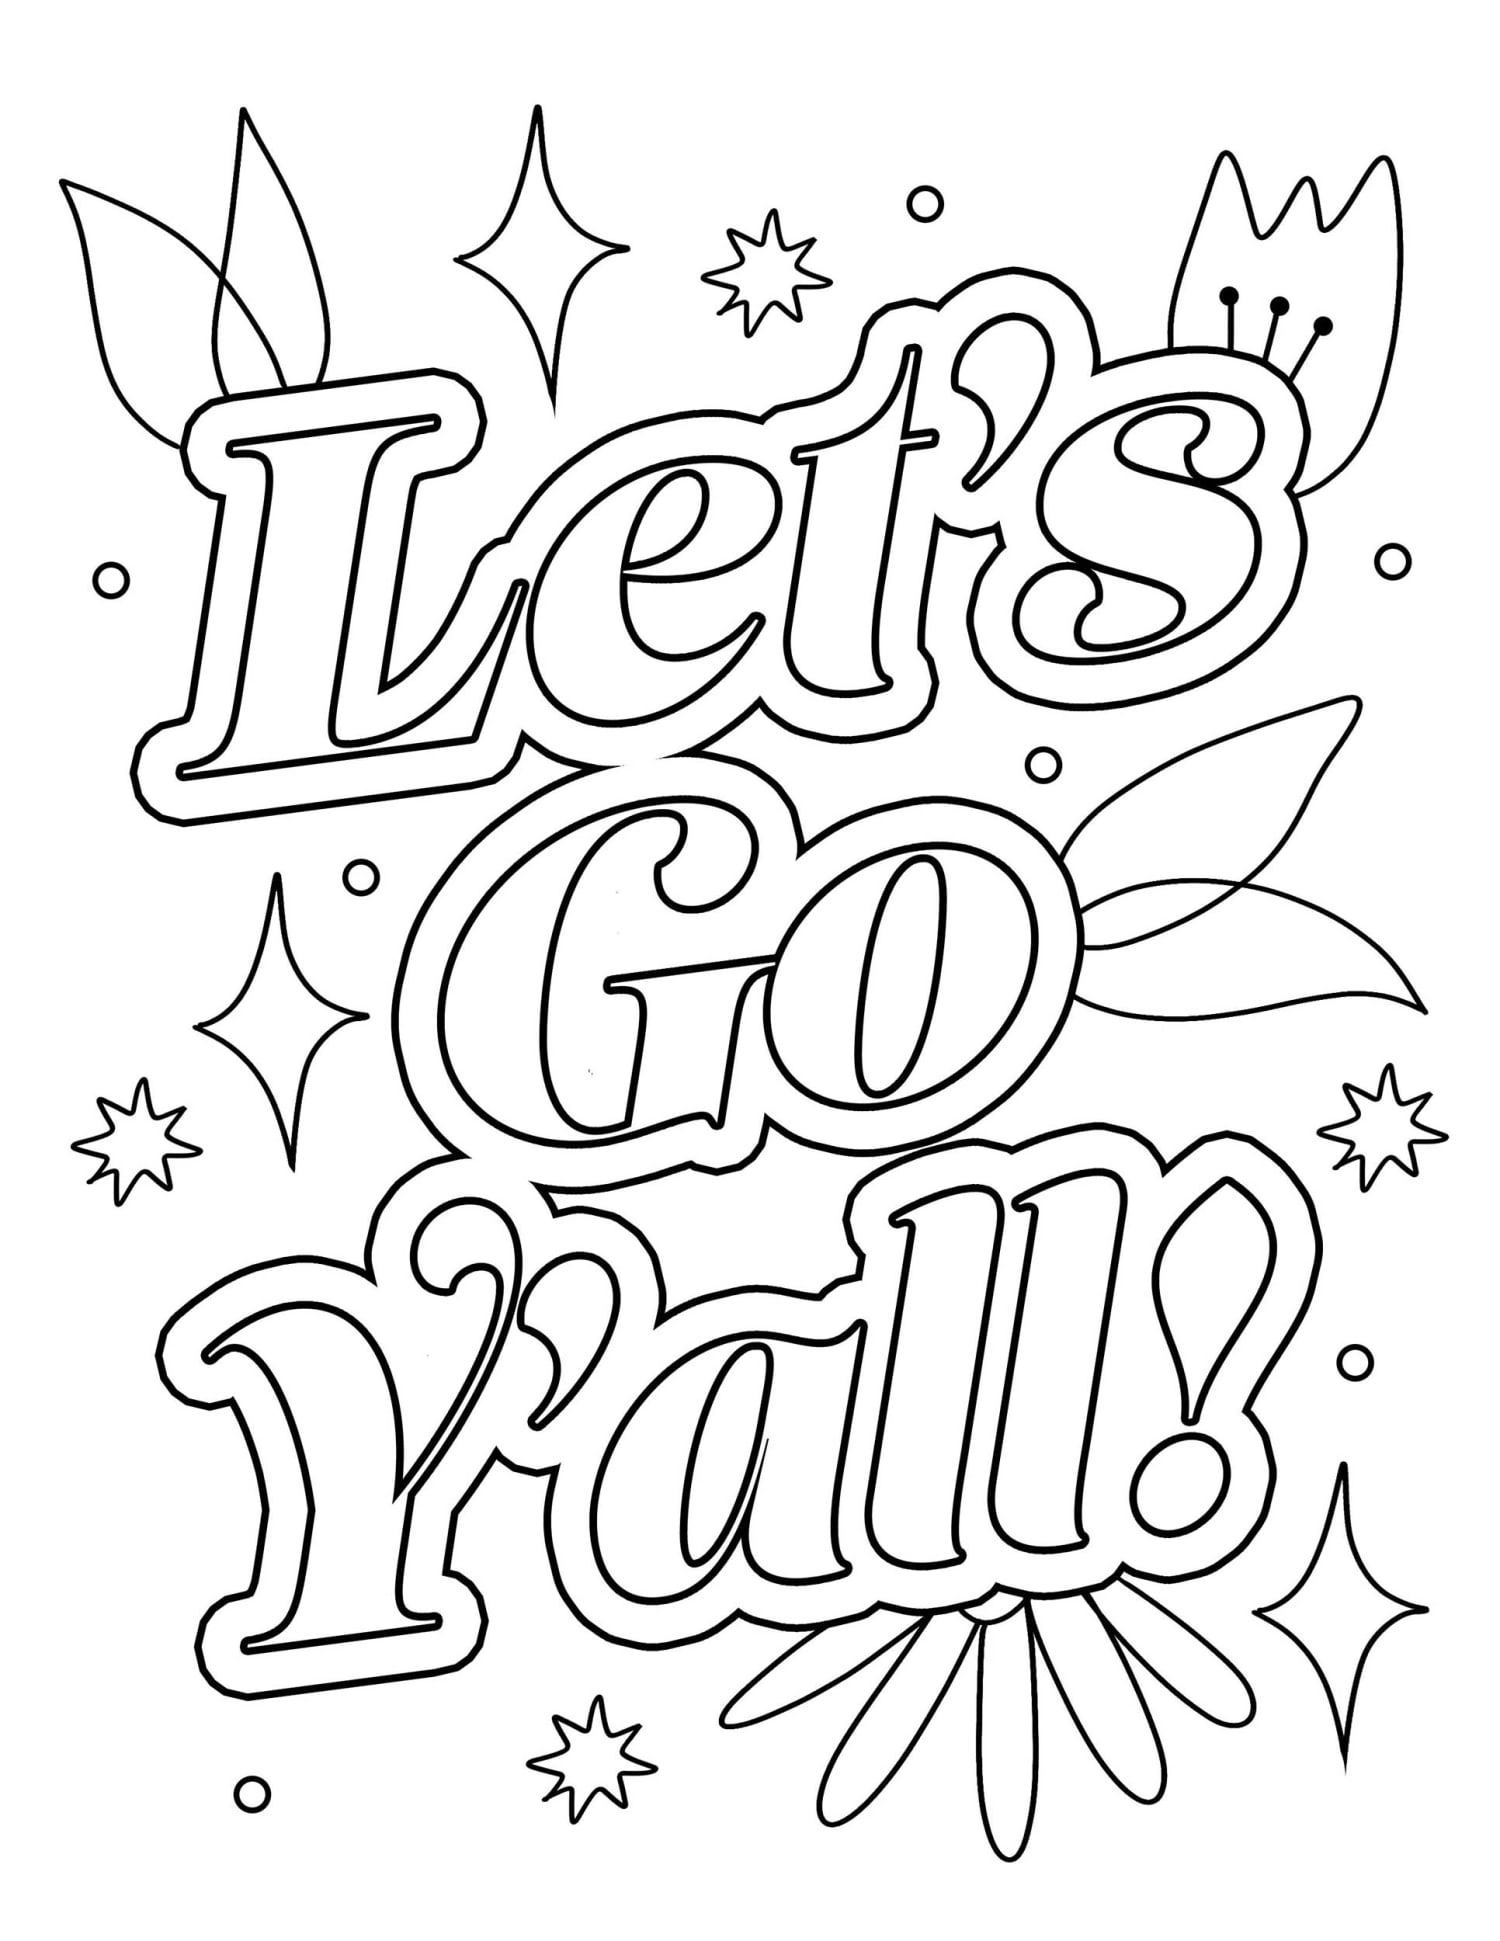 Download free printable coloring sheets   by TODAY show